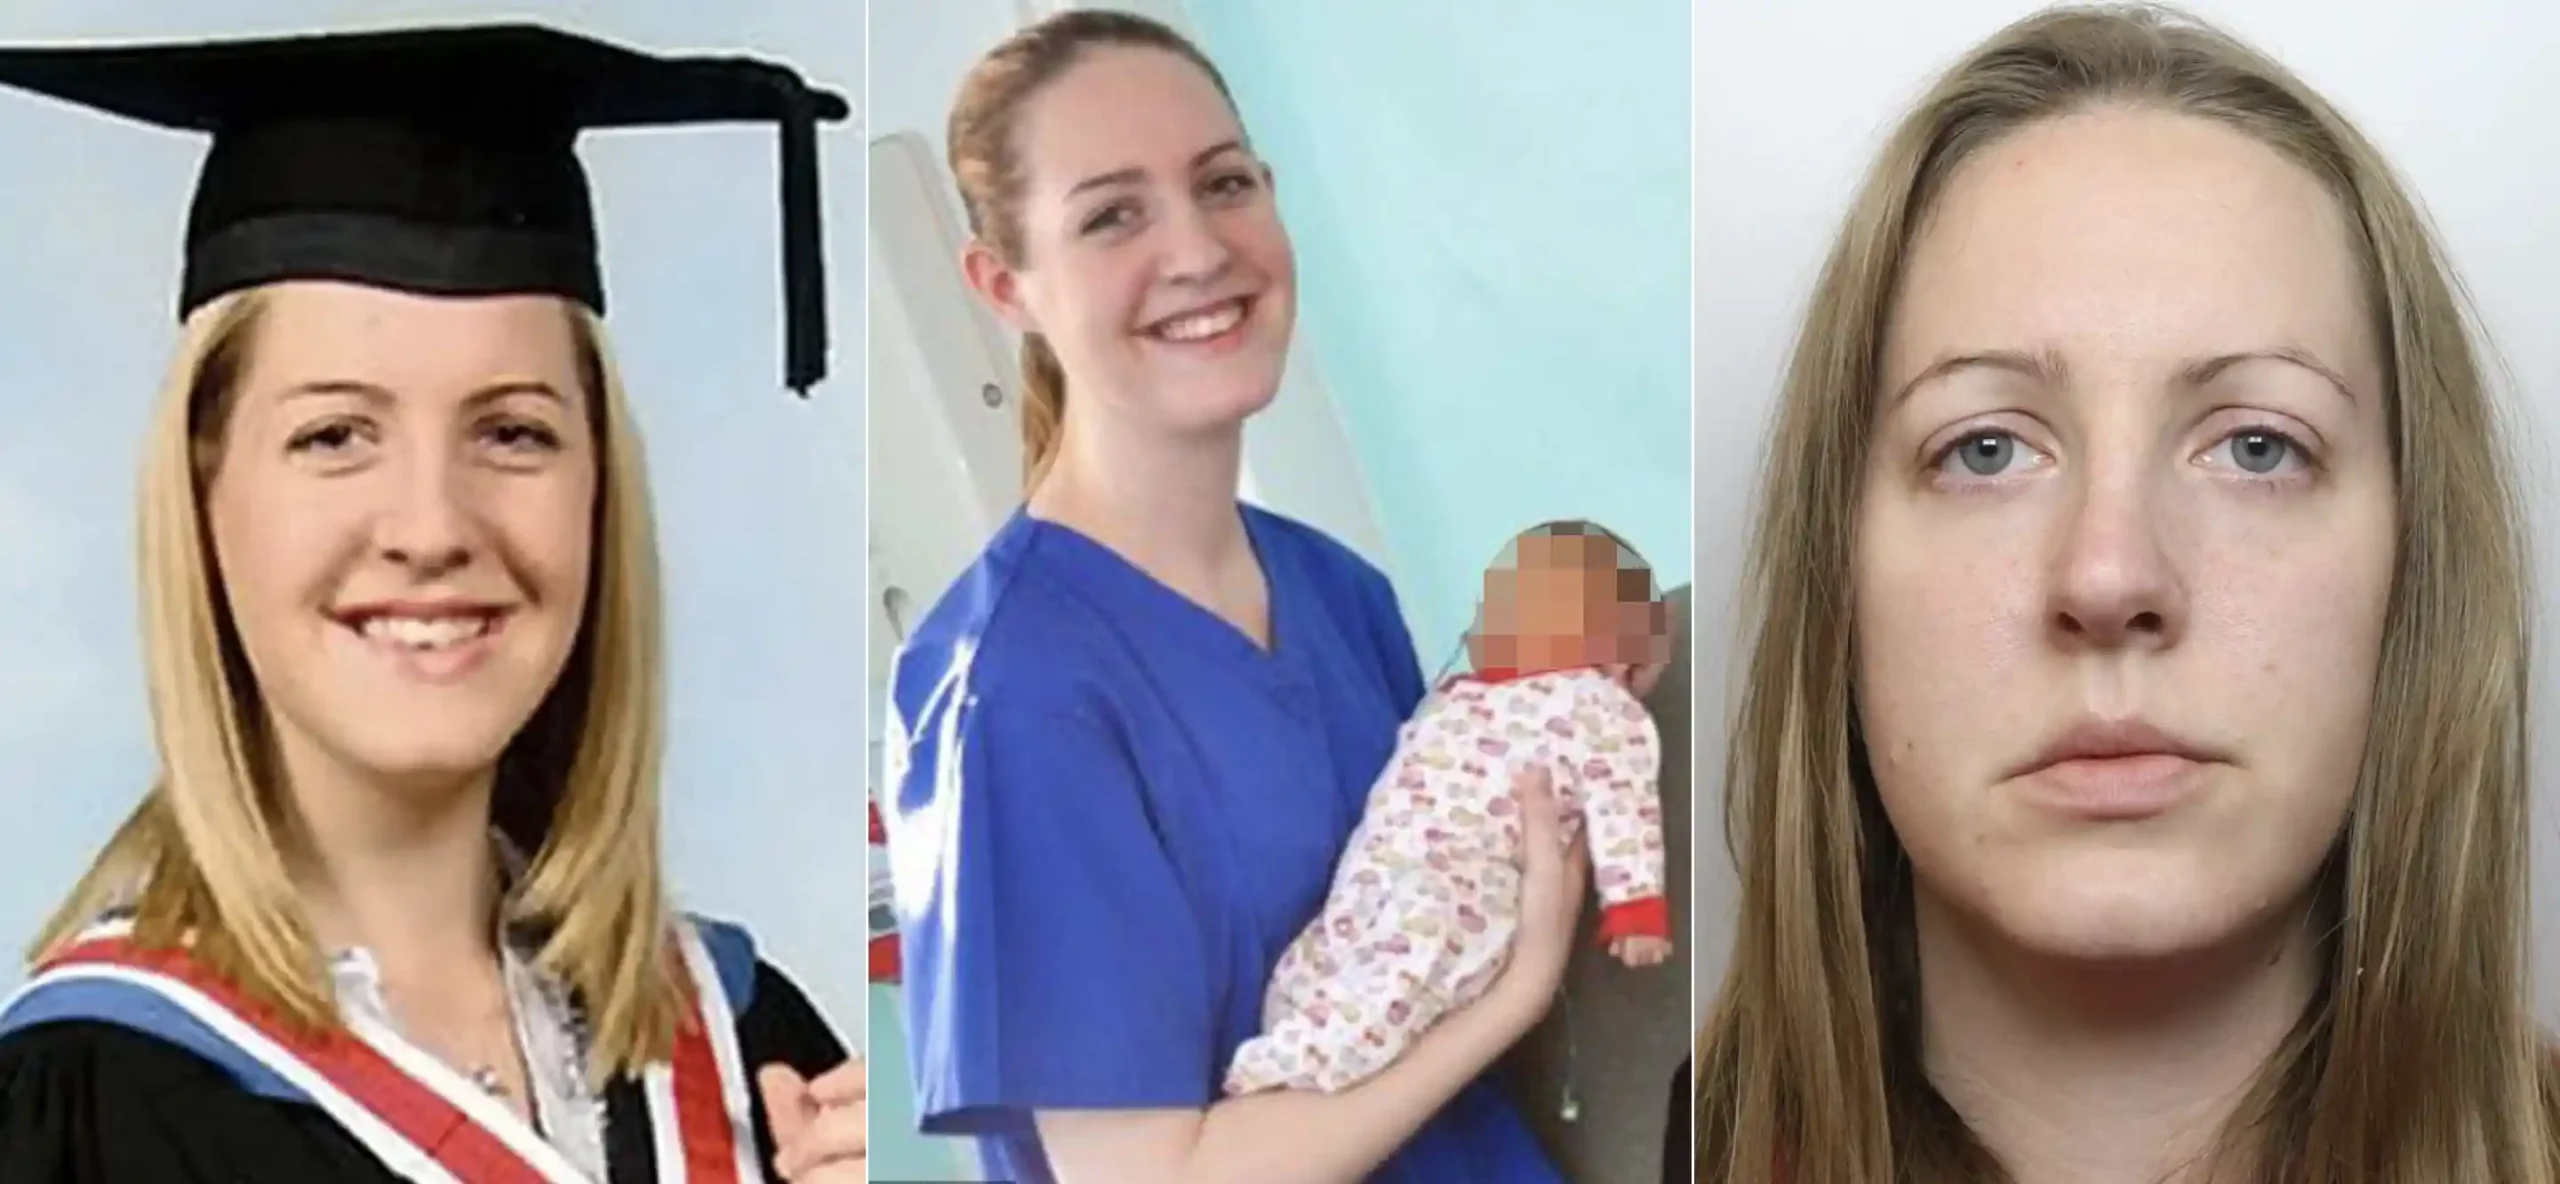 British Neonatal Nurse Lucy Letby Convicted of Murdering 7 Babies